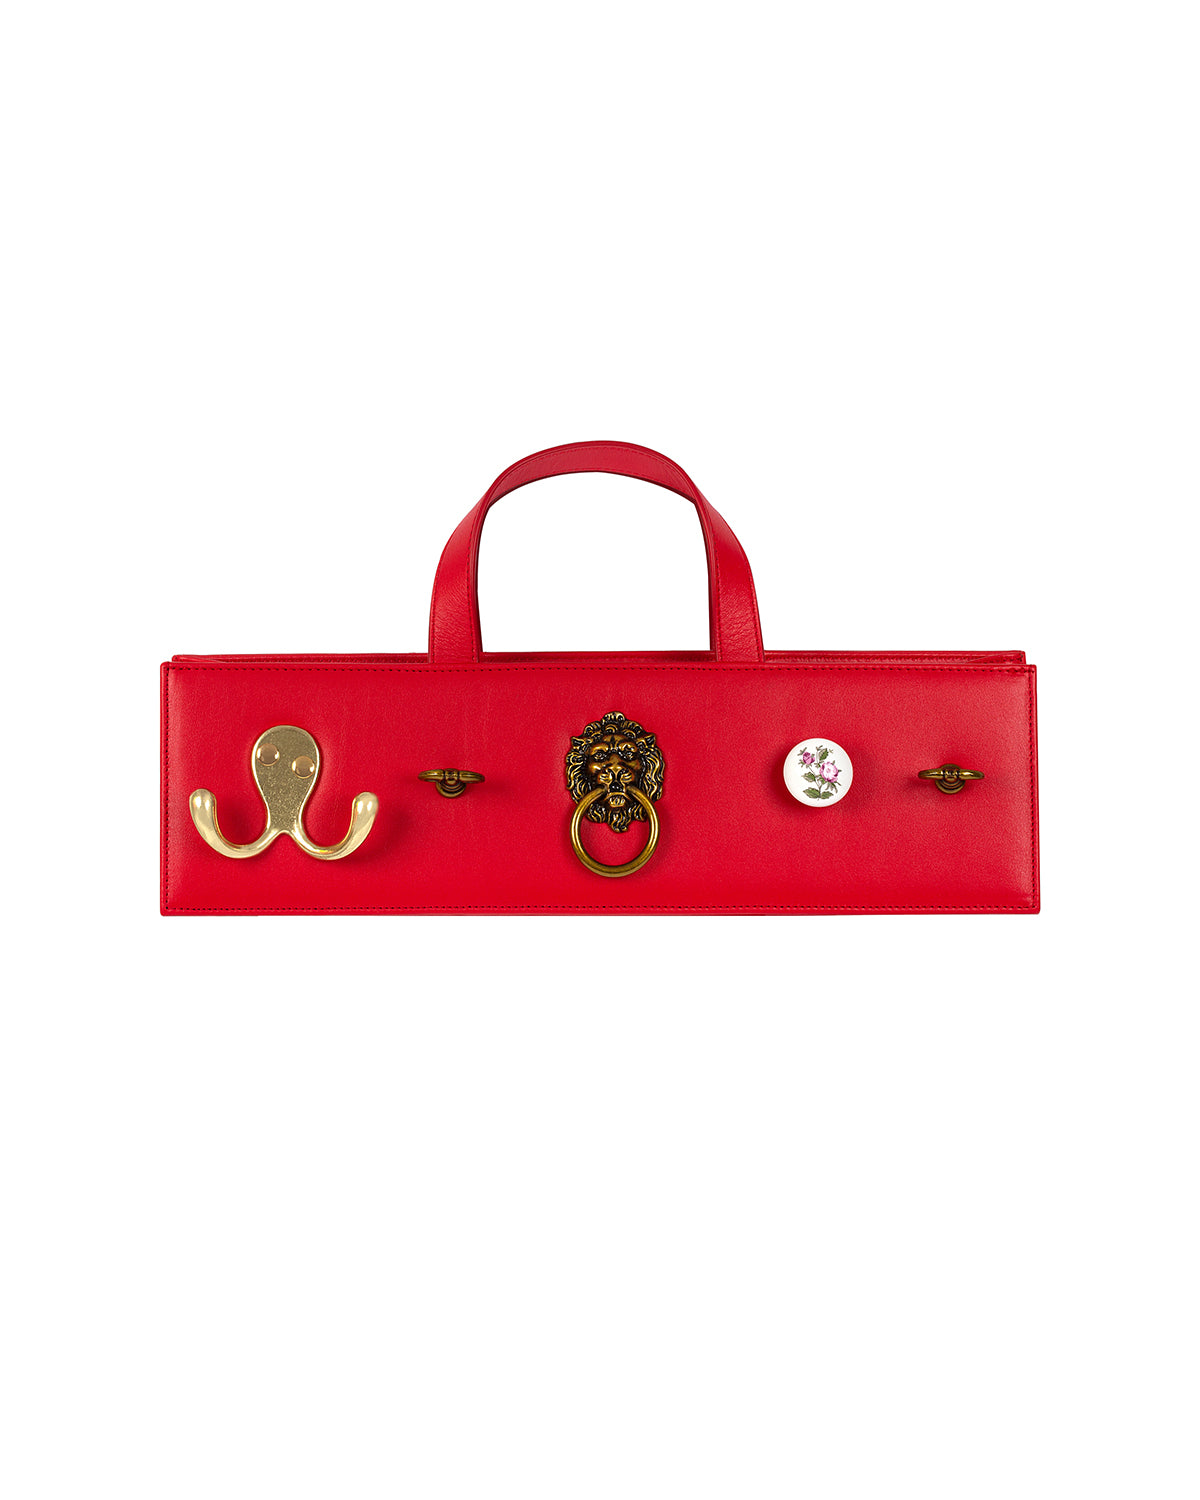 Rectangular cherry red leather bag with five assorted metal and ceramic hardware embellishments. 